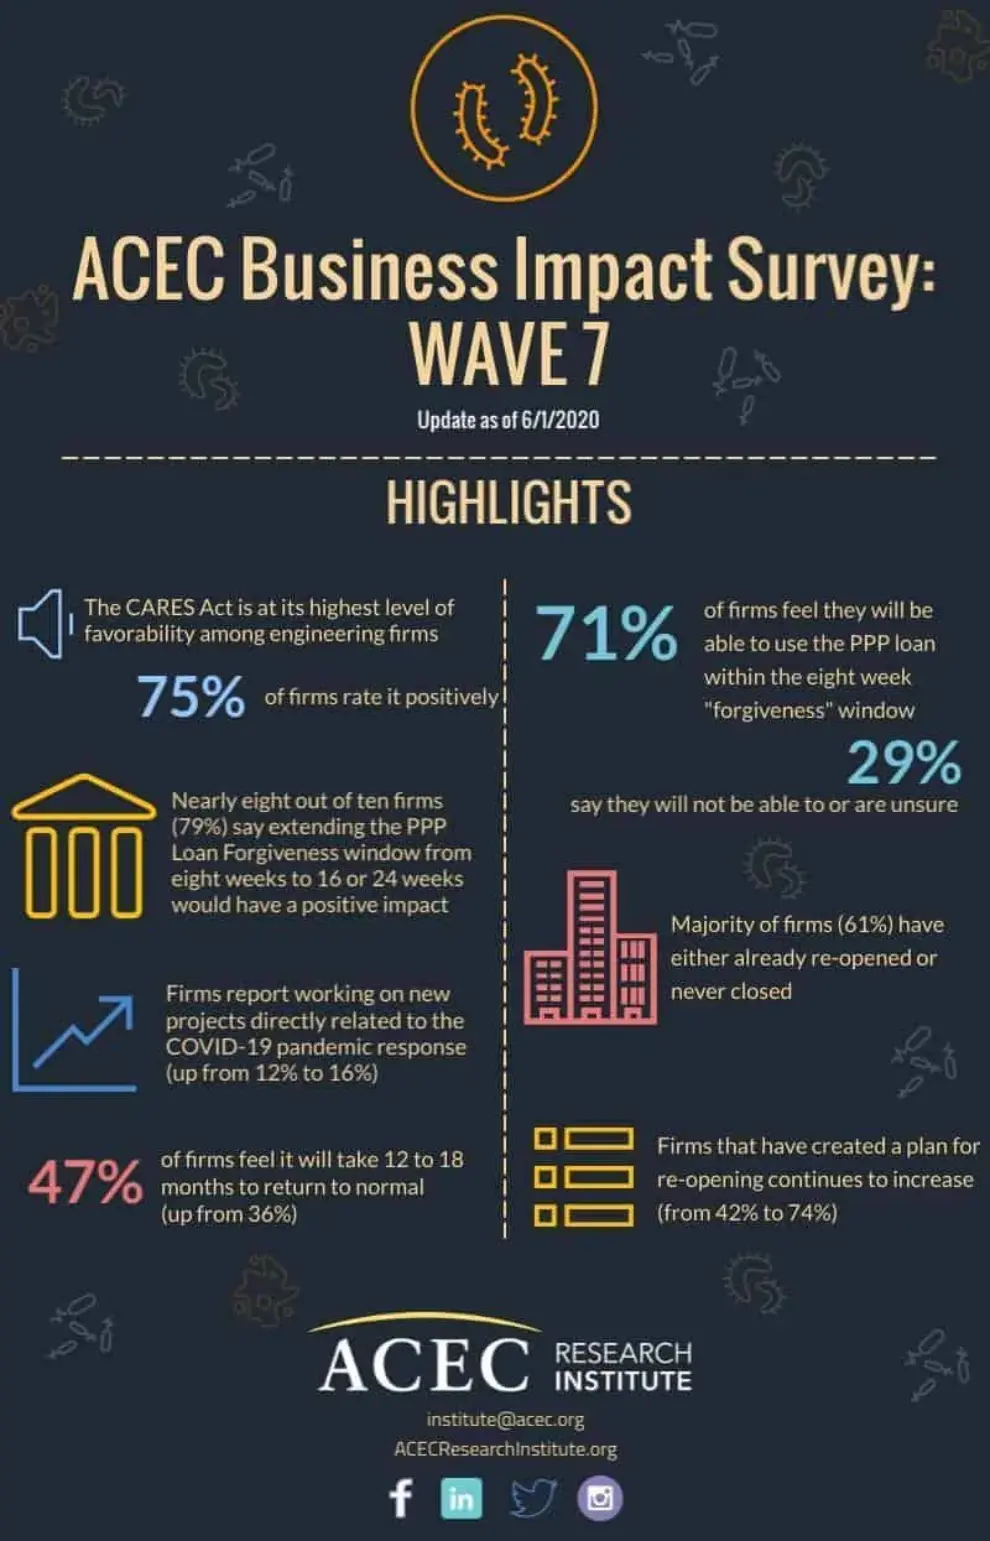 More U.S. Engineering Firms See COVID-19 Related Business Growth, Record Support for PPP Program According to New ACEC Research Institute Survey